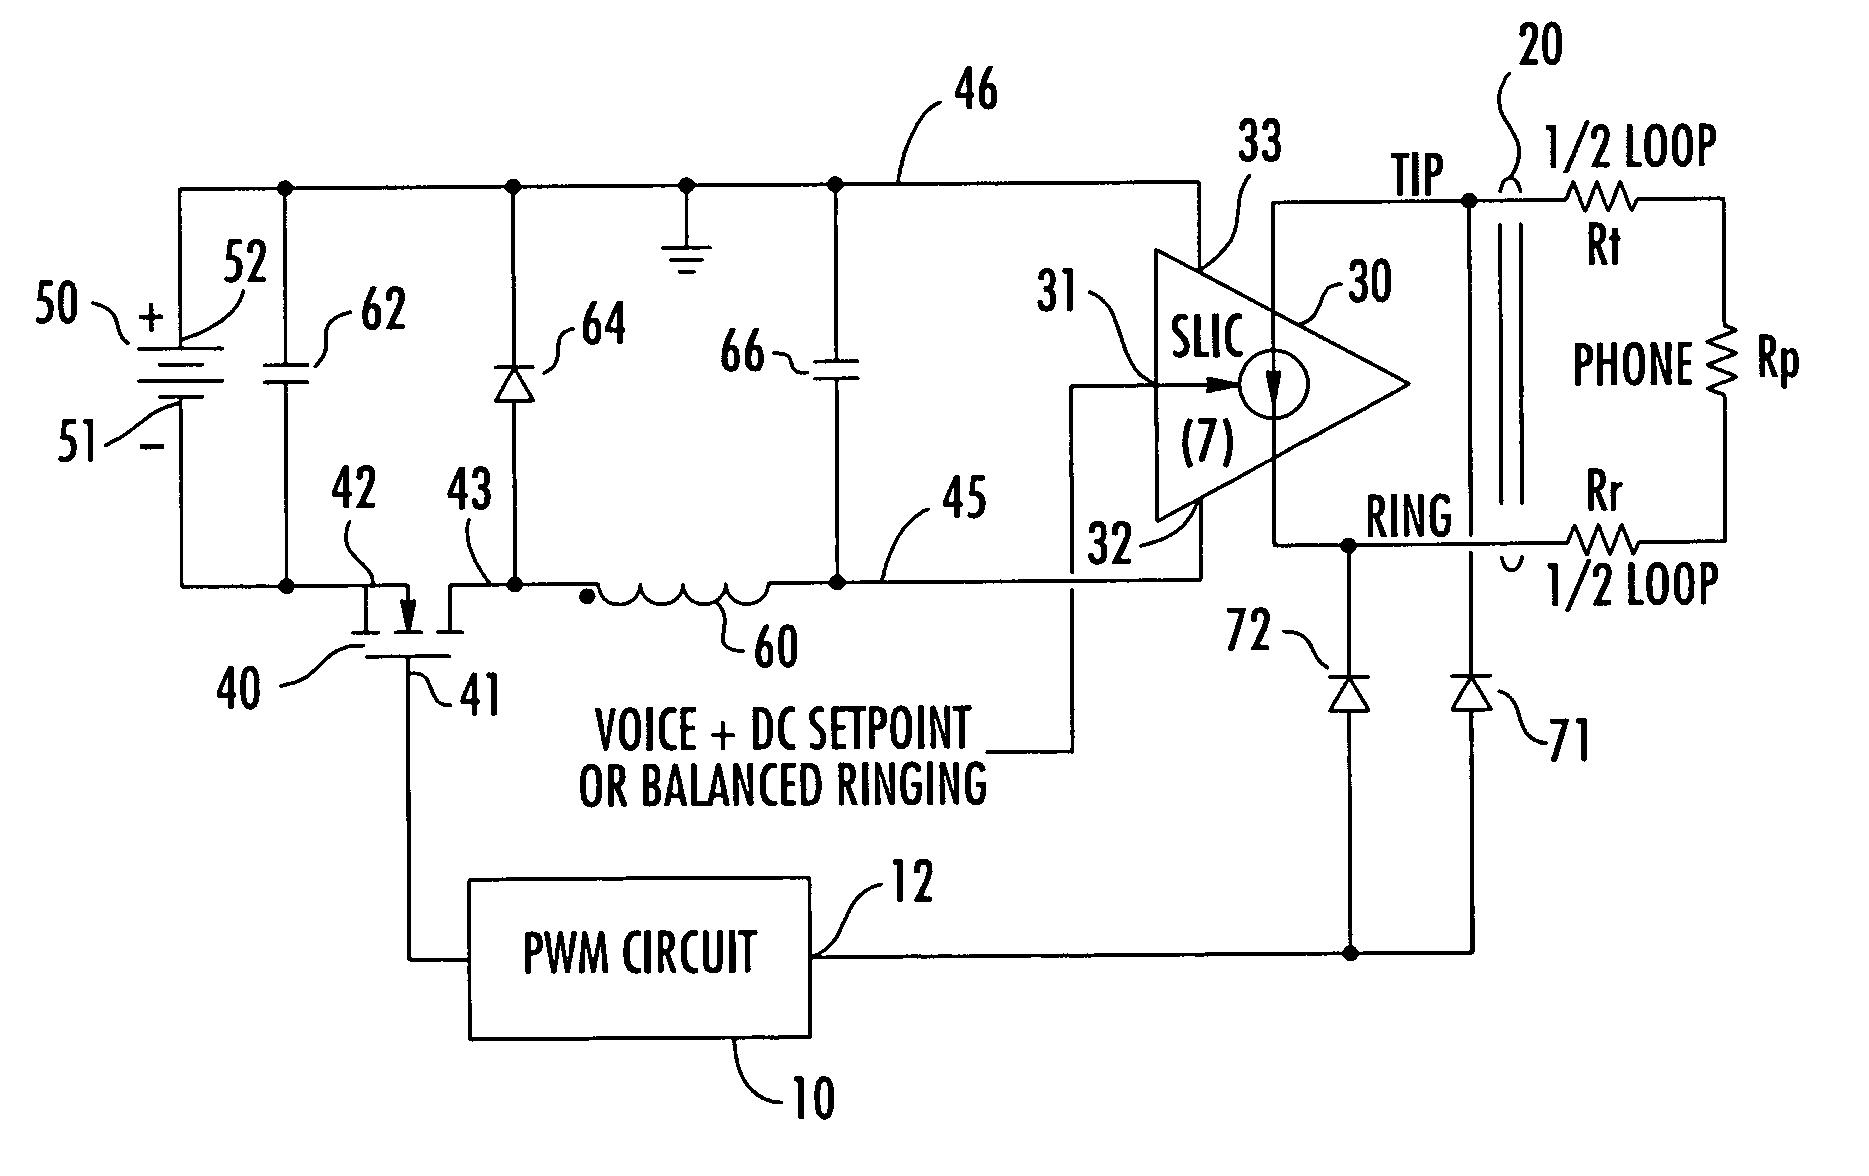 Tracking switchmode power converter for telephony interface circuit